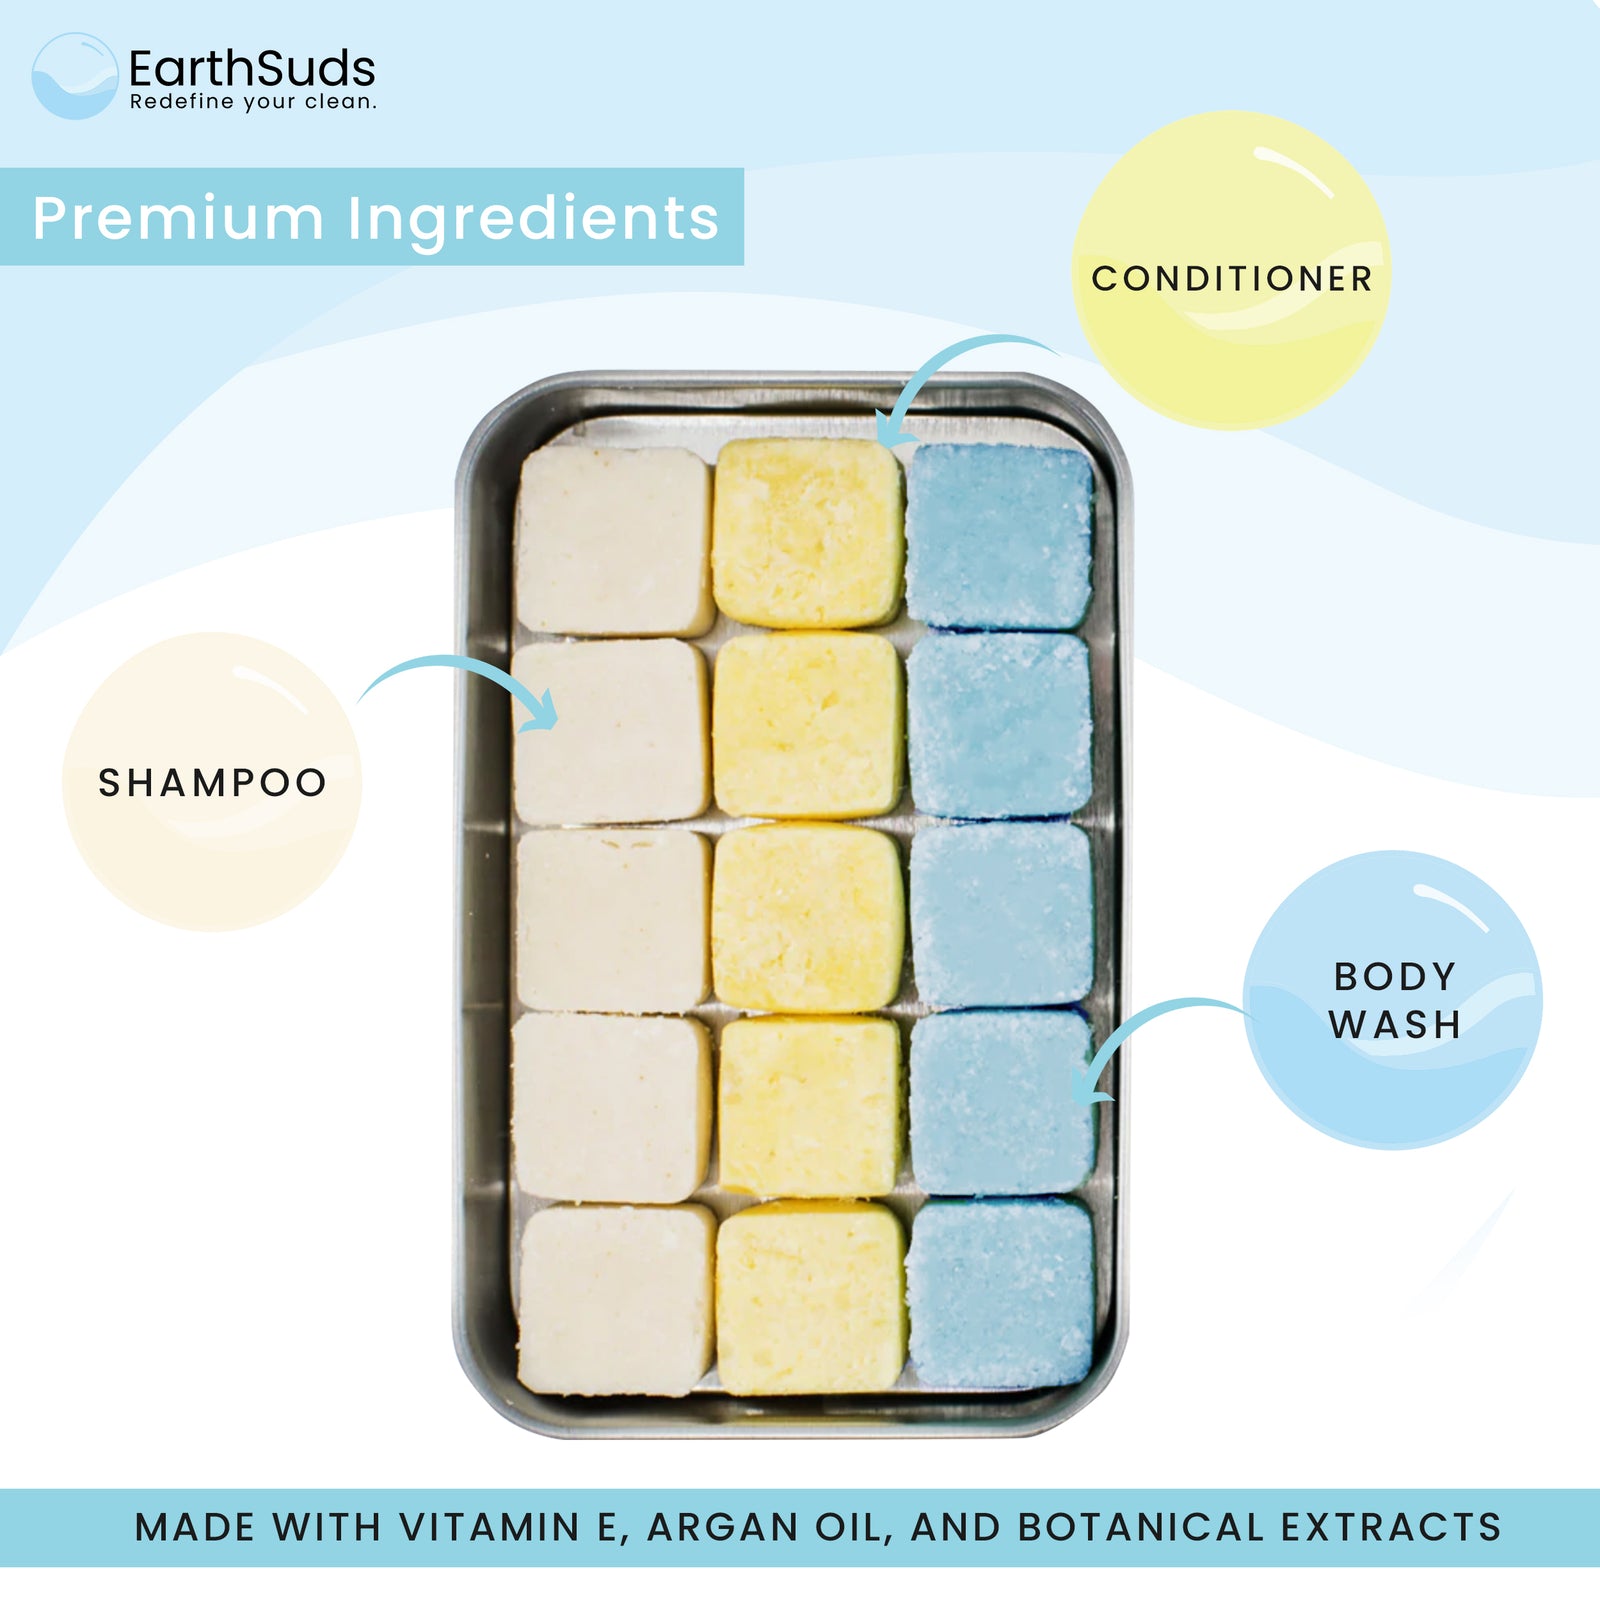 Camping shampoo, conditioner, and body wash tablets. Made from premium ingredients such as vitamin E and argan oil. Biodegradable, travel shampoo.